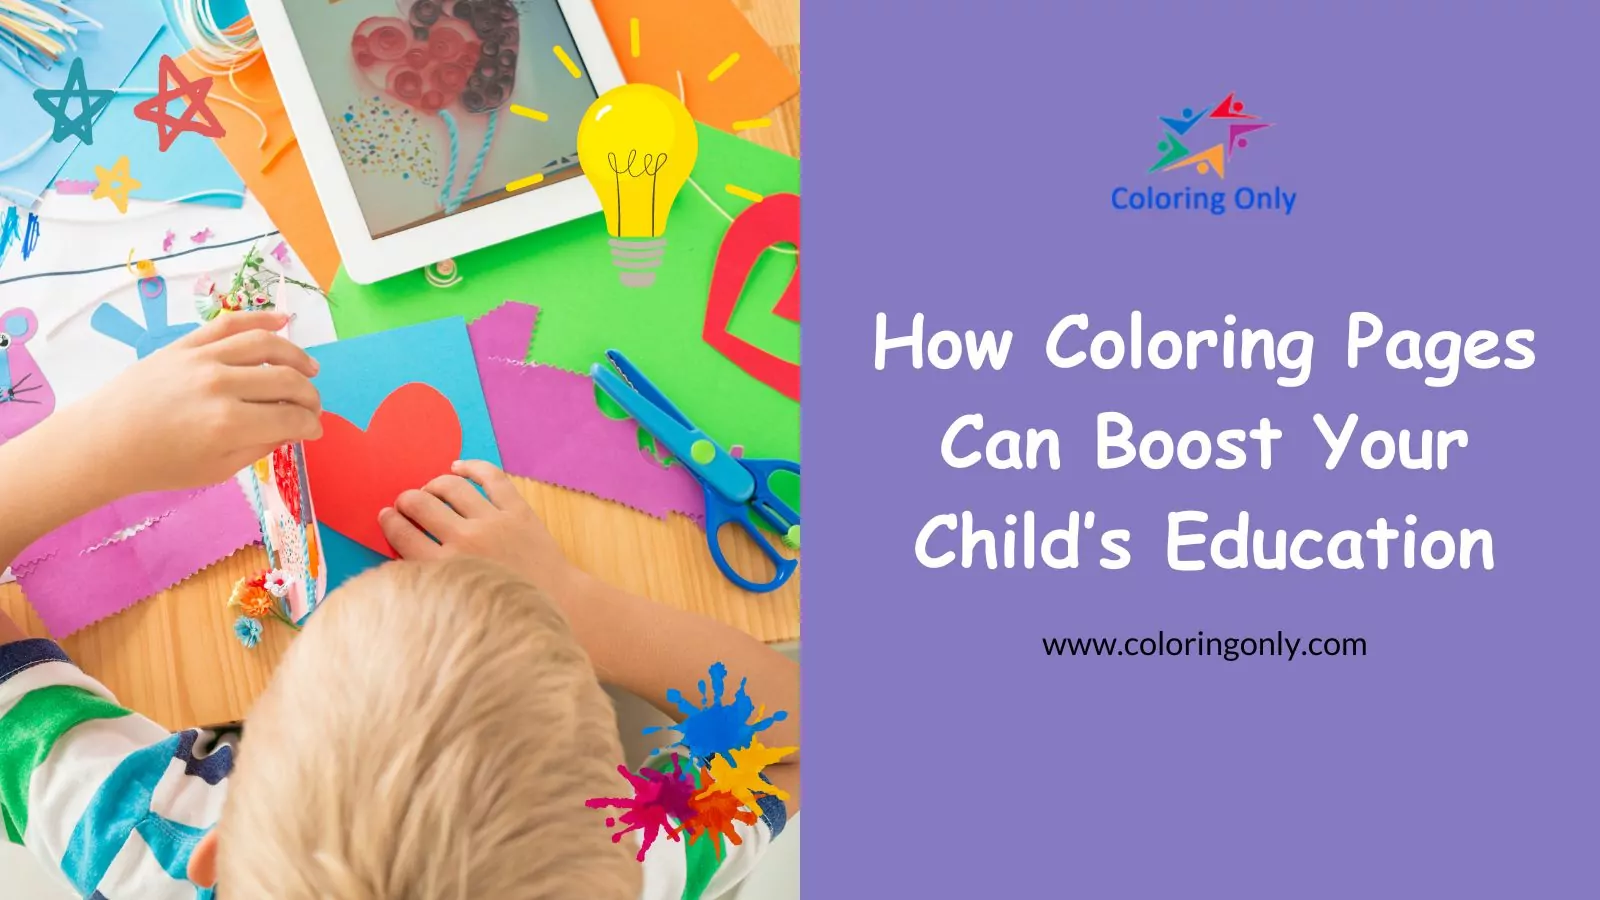 How Coloring Pages Can Boost Your Child’s Education